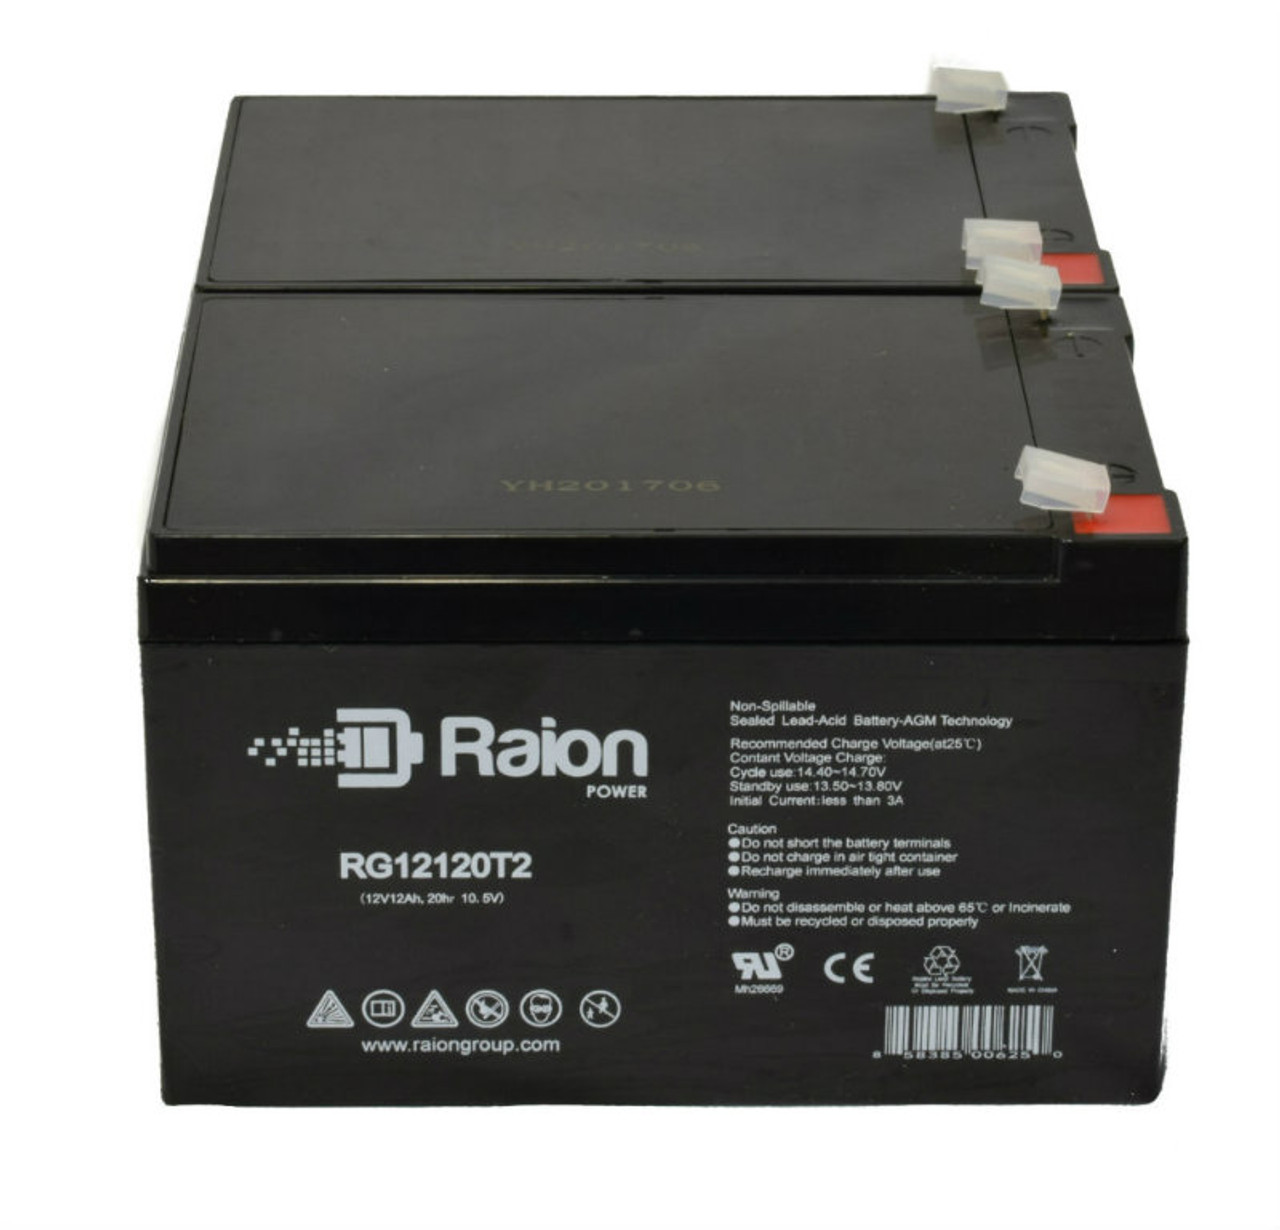 Raion Power 12V 12Ah Non-Spillable Compatible Replacement Battery for Unicell TLA12120 - (2 Pack)